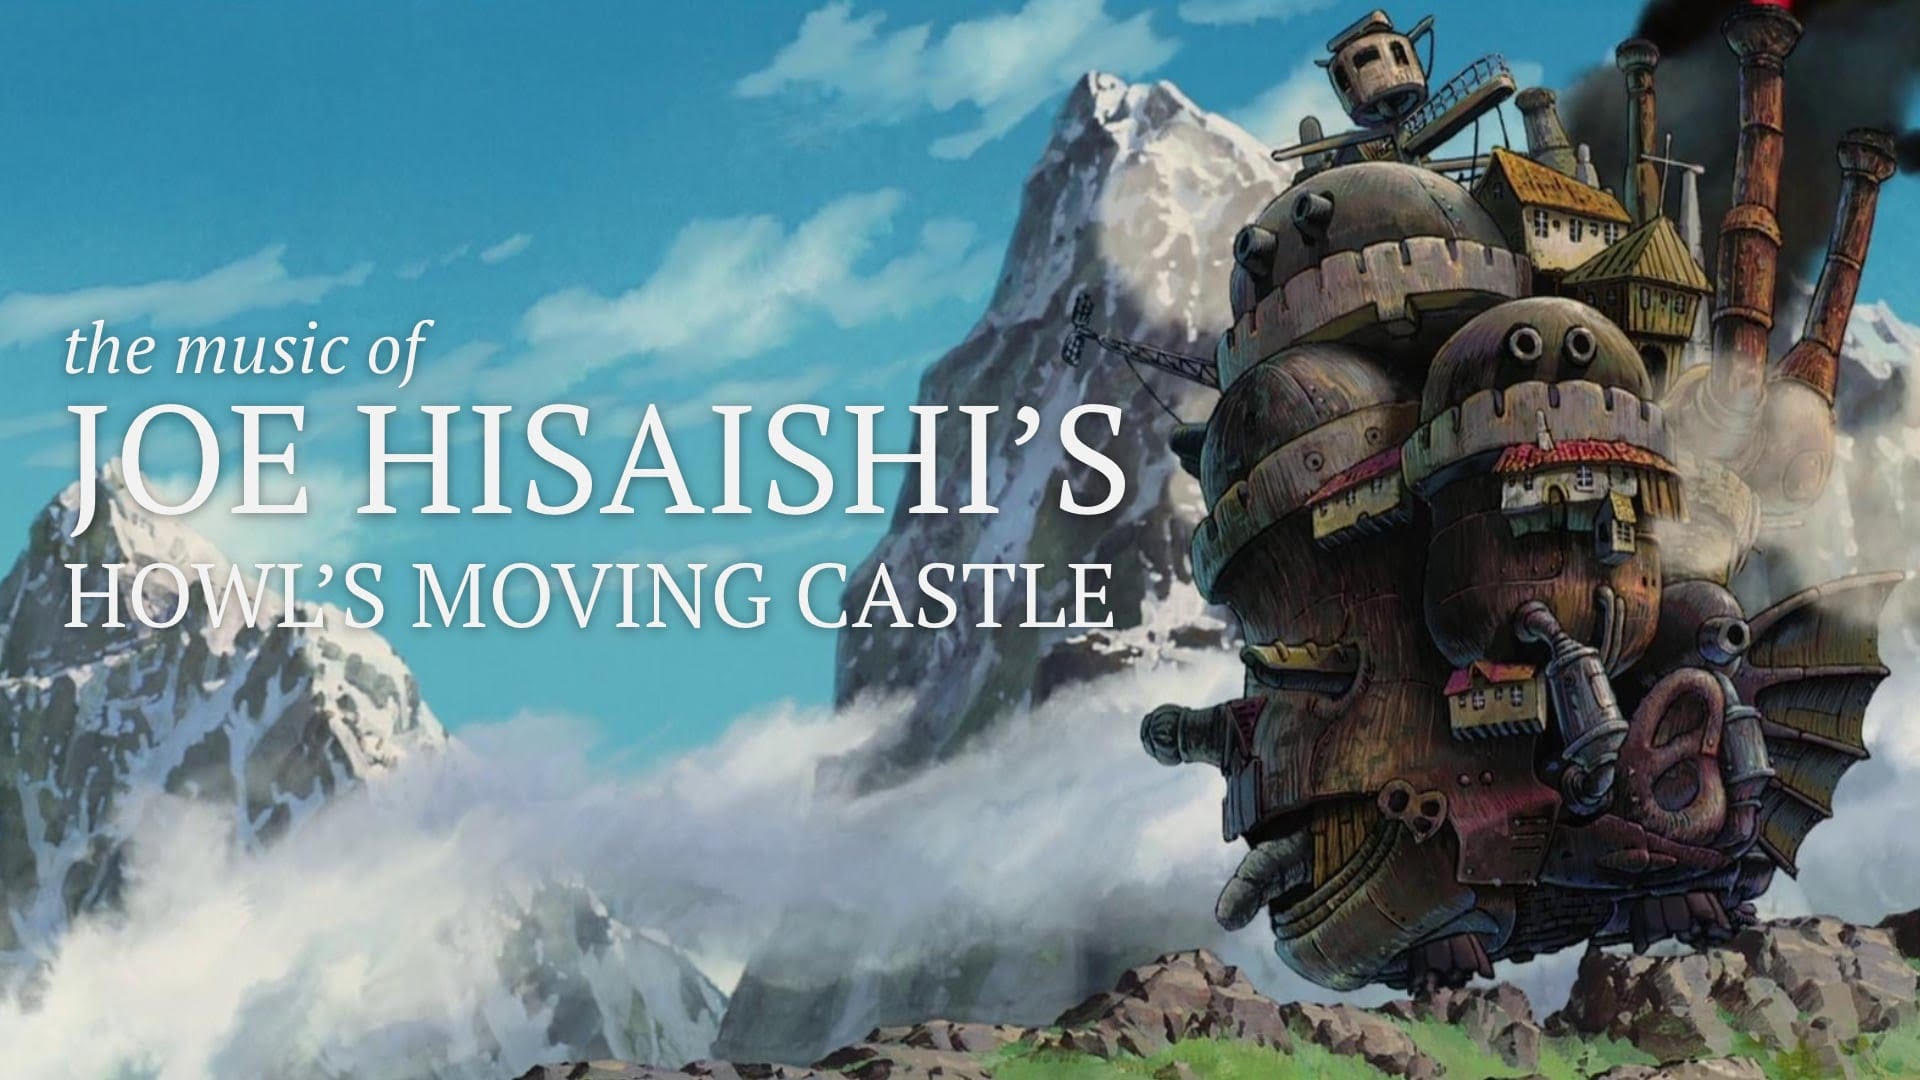 Joe Hisaishi will come back to Europe in 2020 – SoundTrackFest